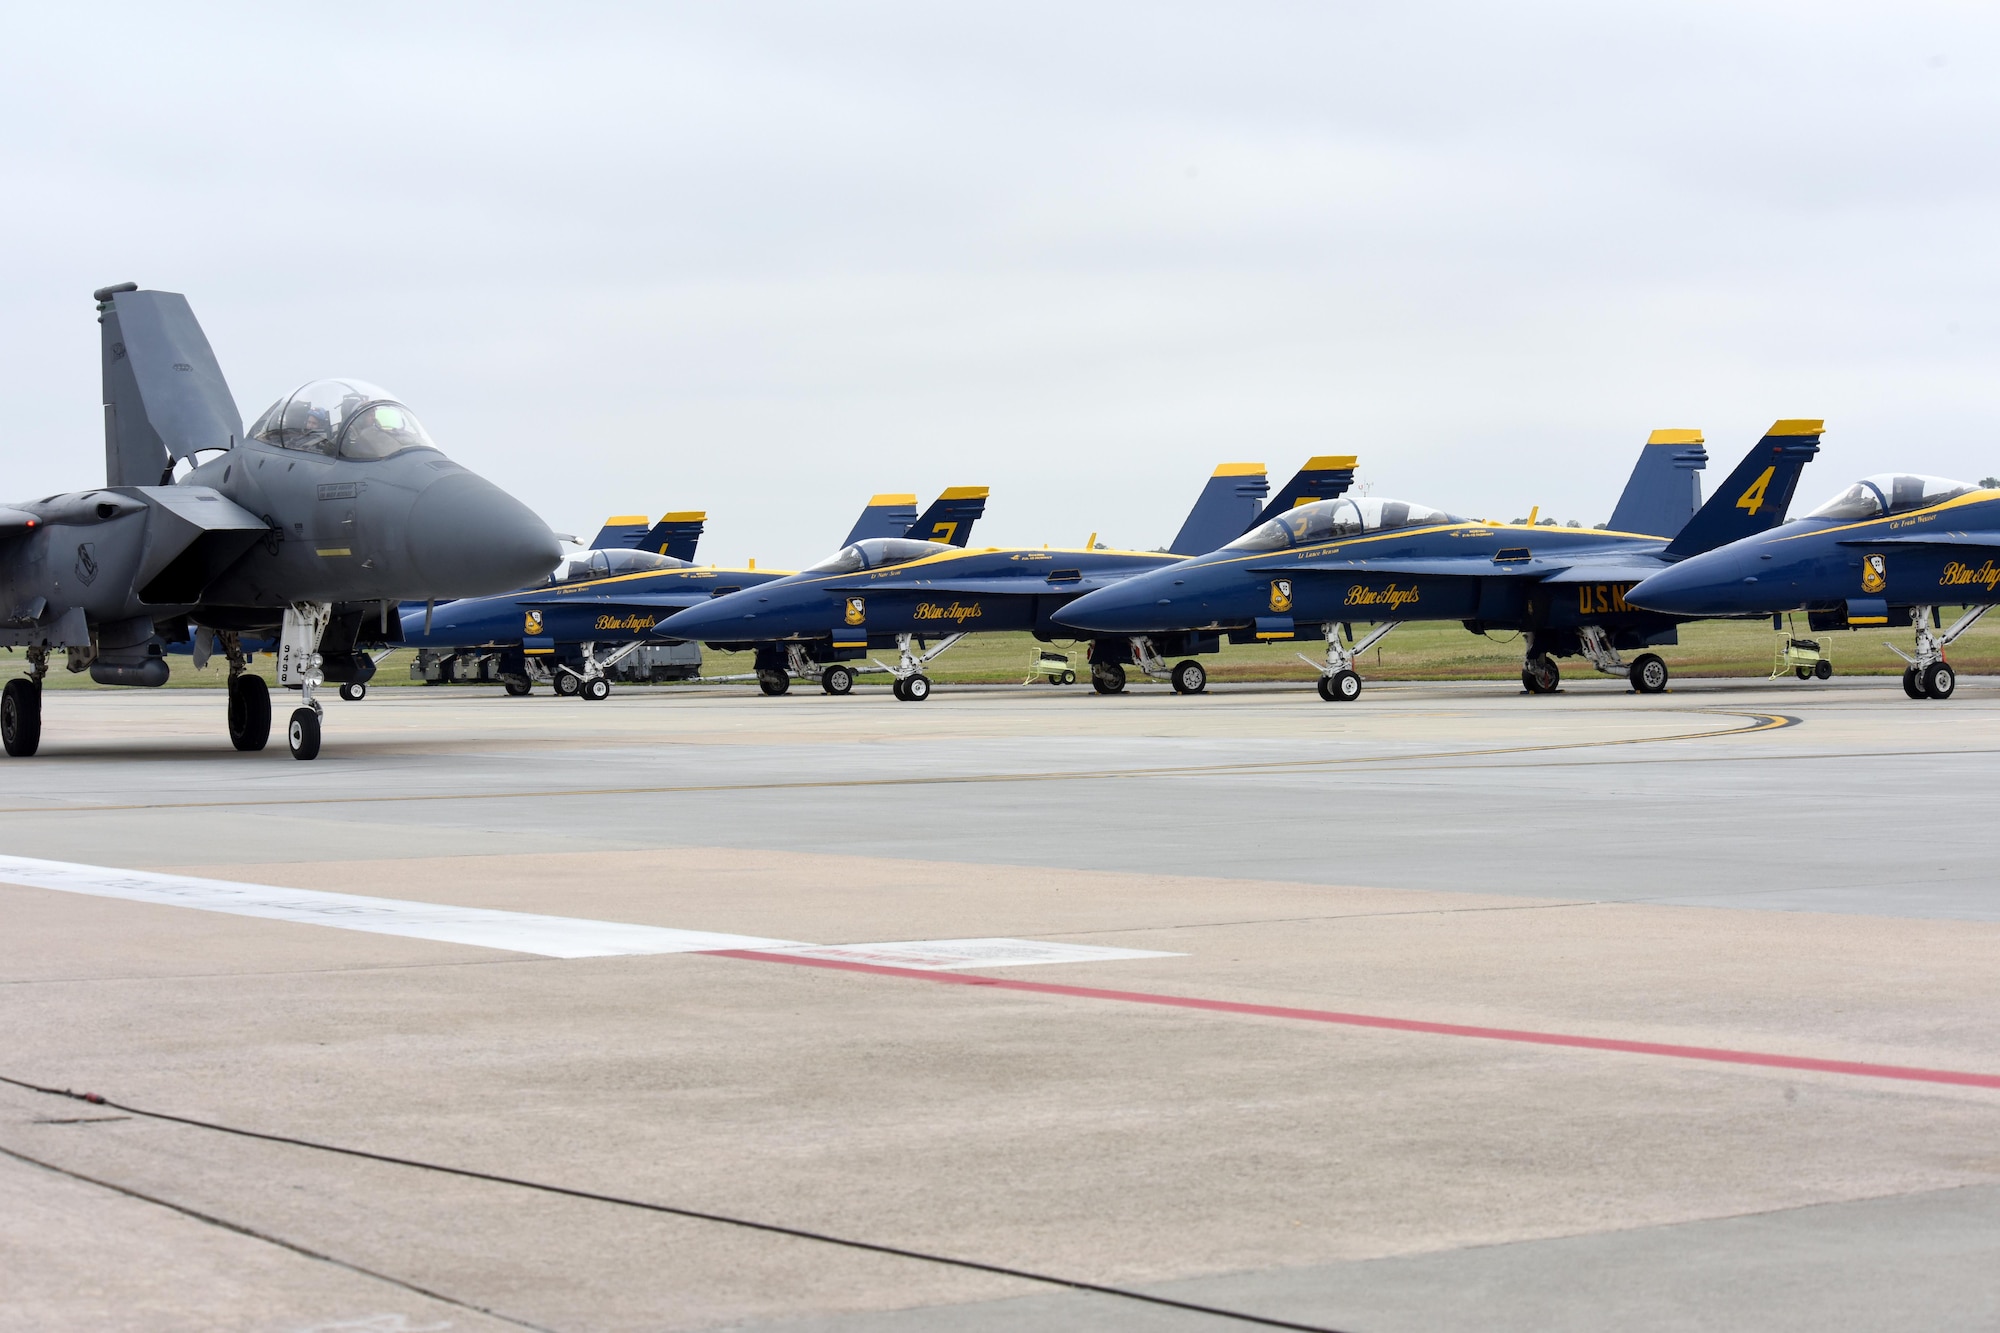 An F-15E Strike Eagle taxis in front of the U.S. Navy Blue Angels aircraft during the Wings Over Wayne Air Show, May 21, 2017, at Seymour Johnson Air Force Base, North Carolina. Later this year, the 4th Fighter Wing will celebrate its 75th anniversary with a weekend of heritage events and ceremonies. (U.S. Air Force photo by Airman 1st Class Miranda Loera)